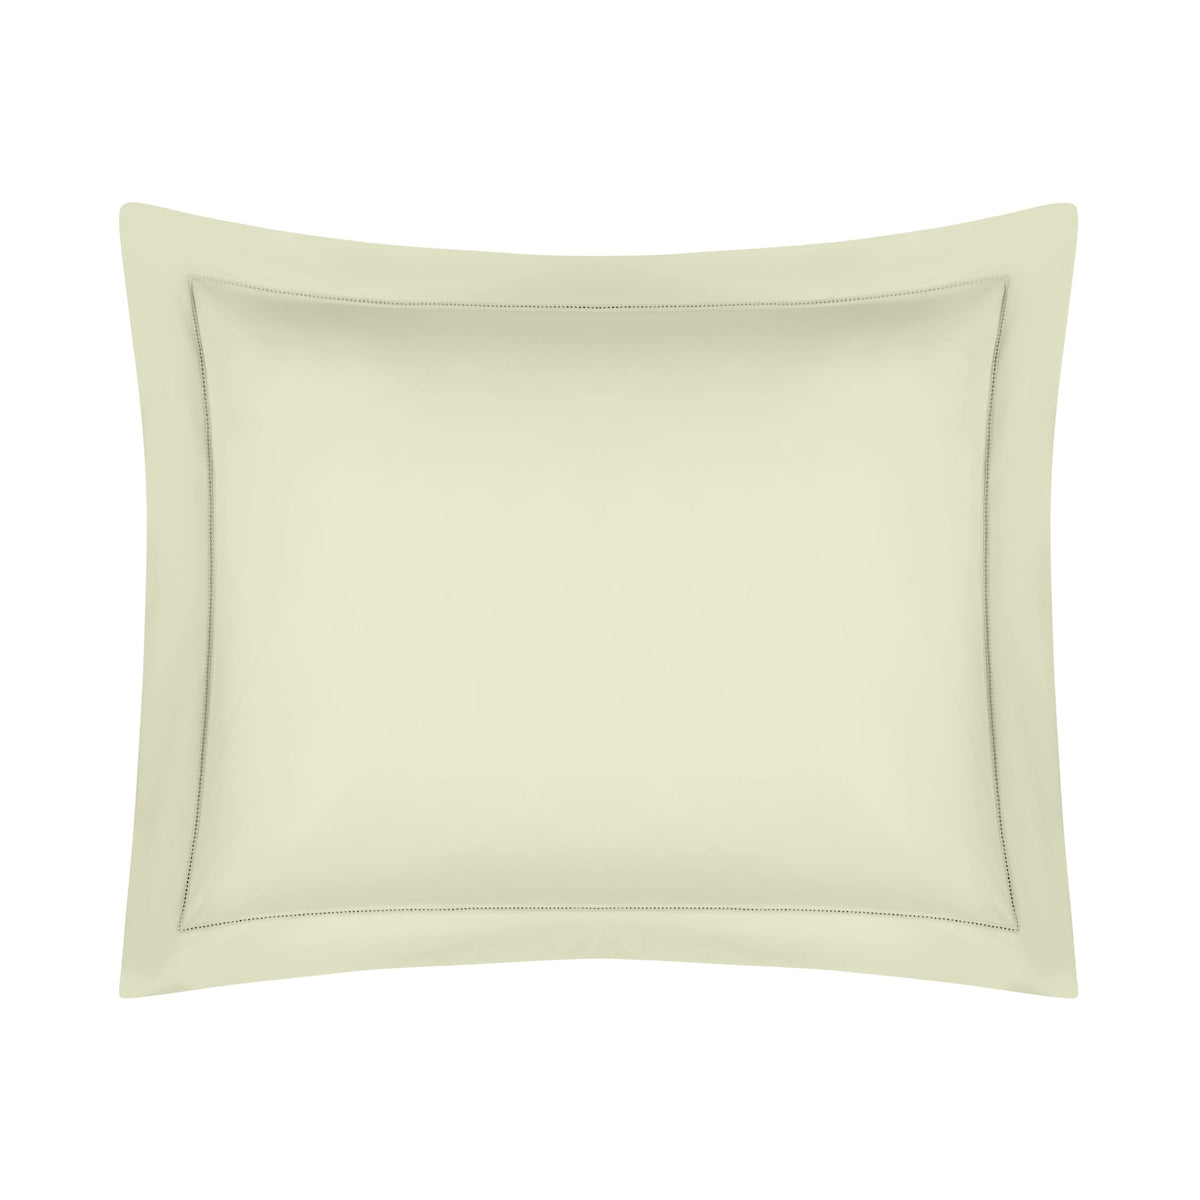 Sham of Home Treasures Perla Percale Bedding in Mint Green Color